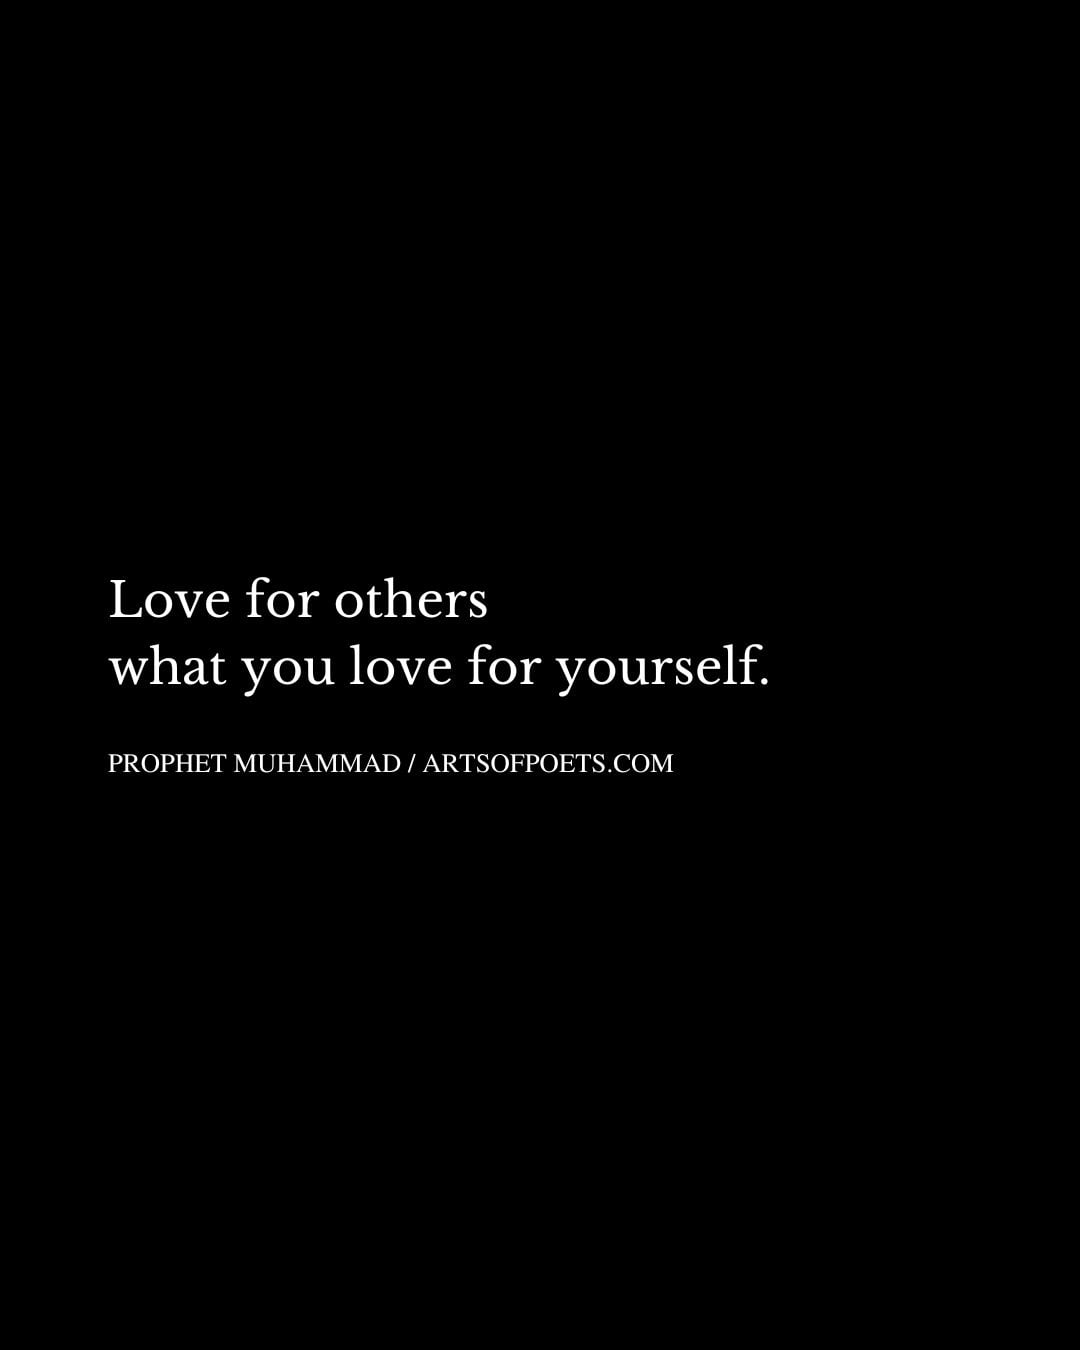 Love for others what you love for yourself